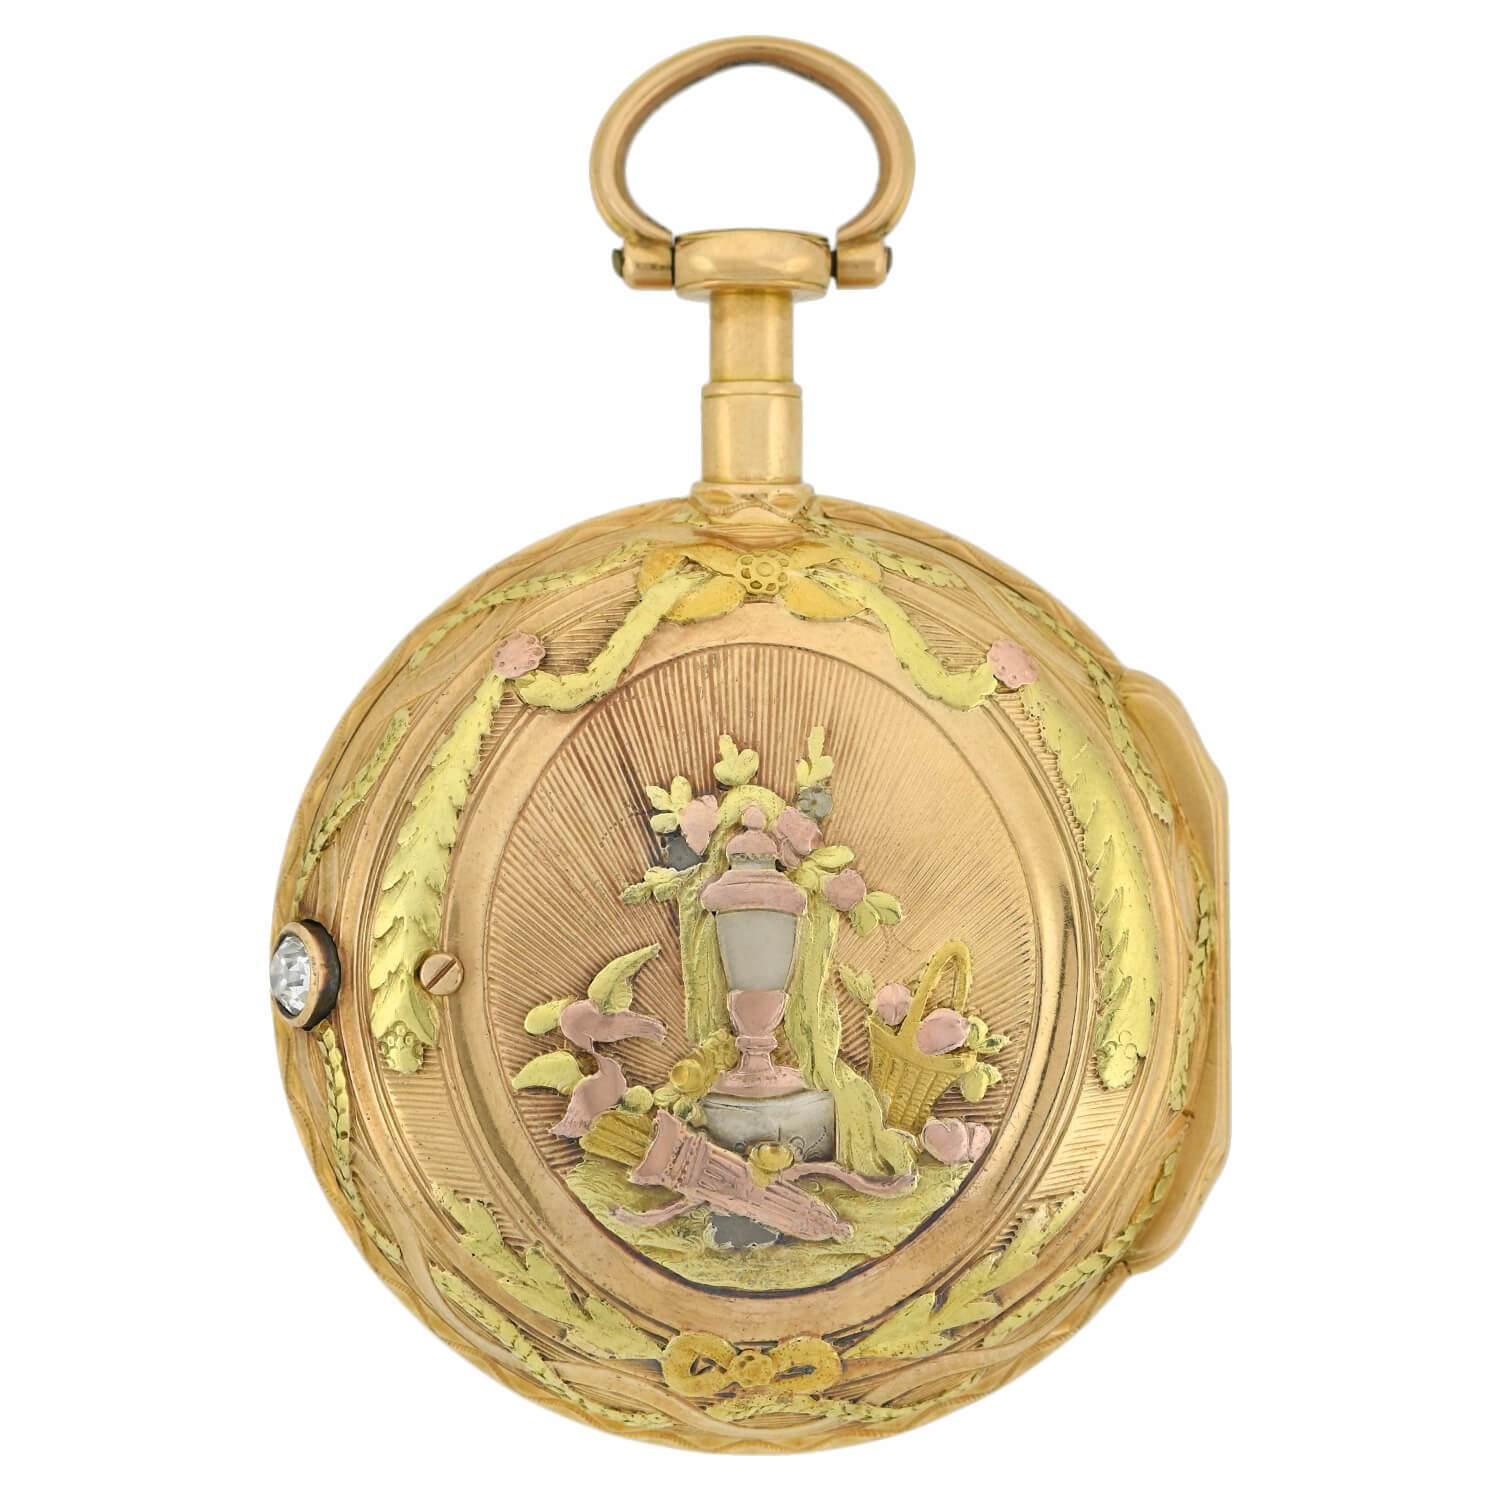 A rare and exquisite mixed metals diamond pocket watch made by Honnoré Lieutaud of Marseille, France during the Georgian (ca1780) era. This vibrant 18kt gold verge quarter repeater timepiece adorns a domed crystal covering over the white watch face